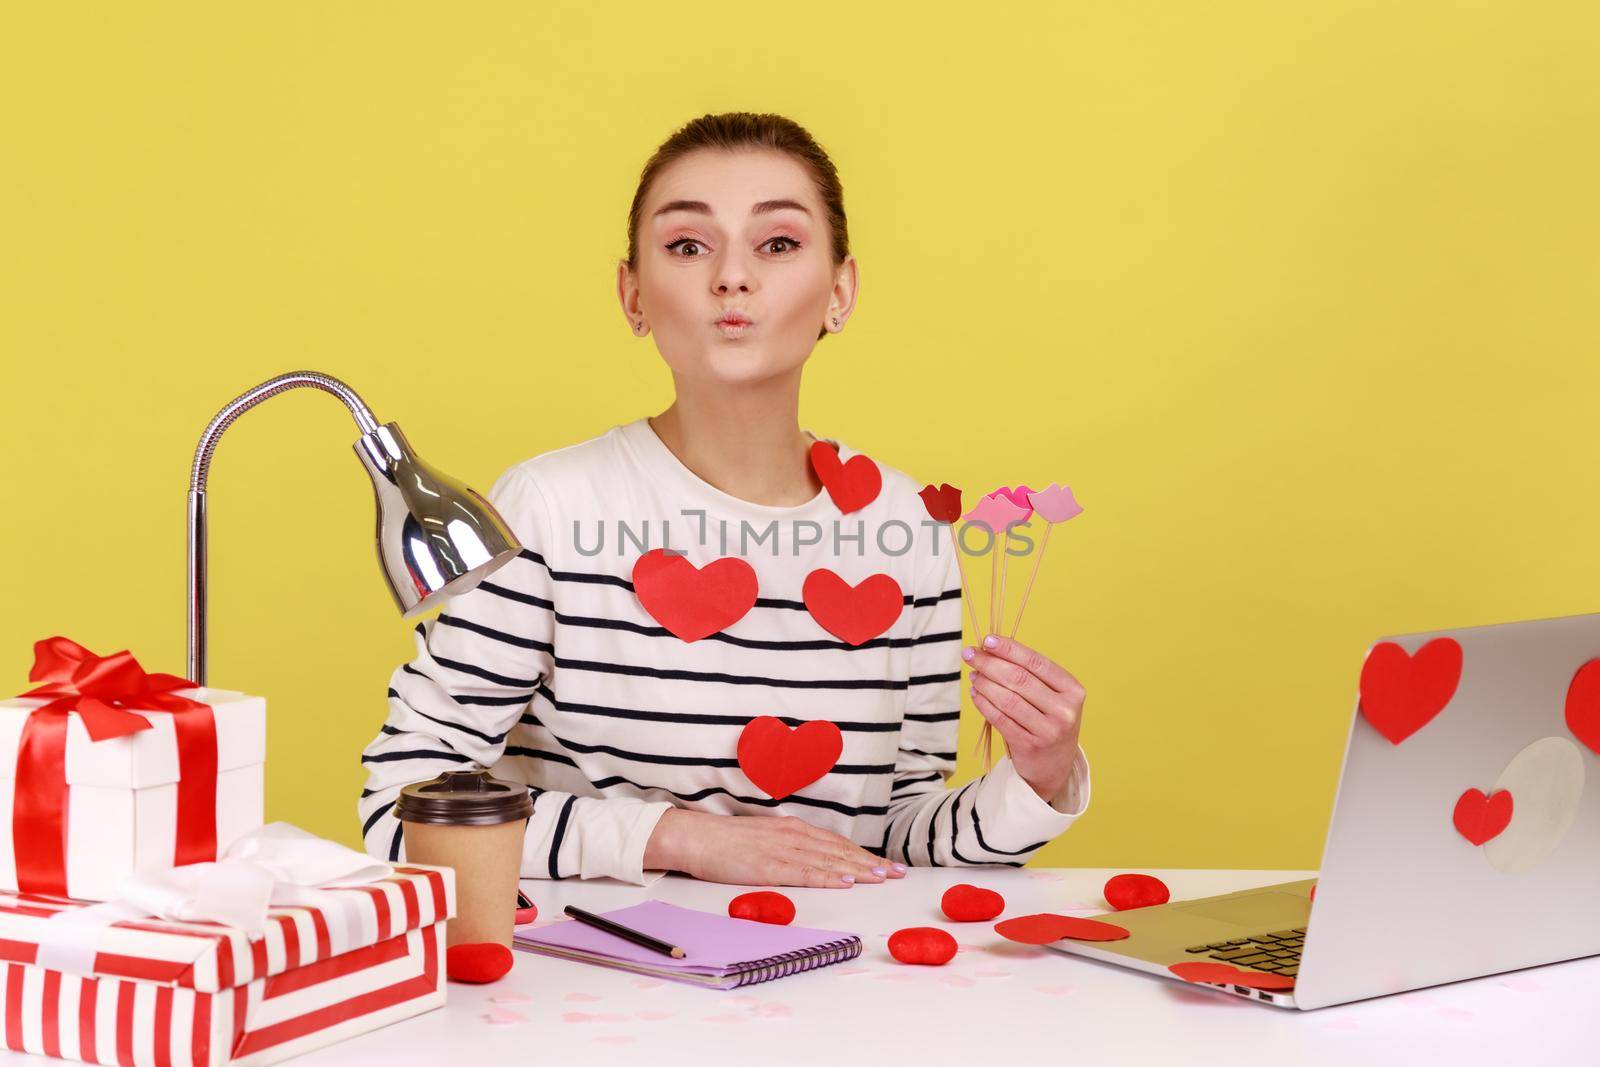 Portrait of funny optimistic festive woman office manager sitting on workplace with pout lips and holding party props in hands. Indoor studio studio shot isolated on yellow background.